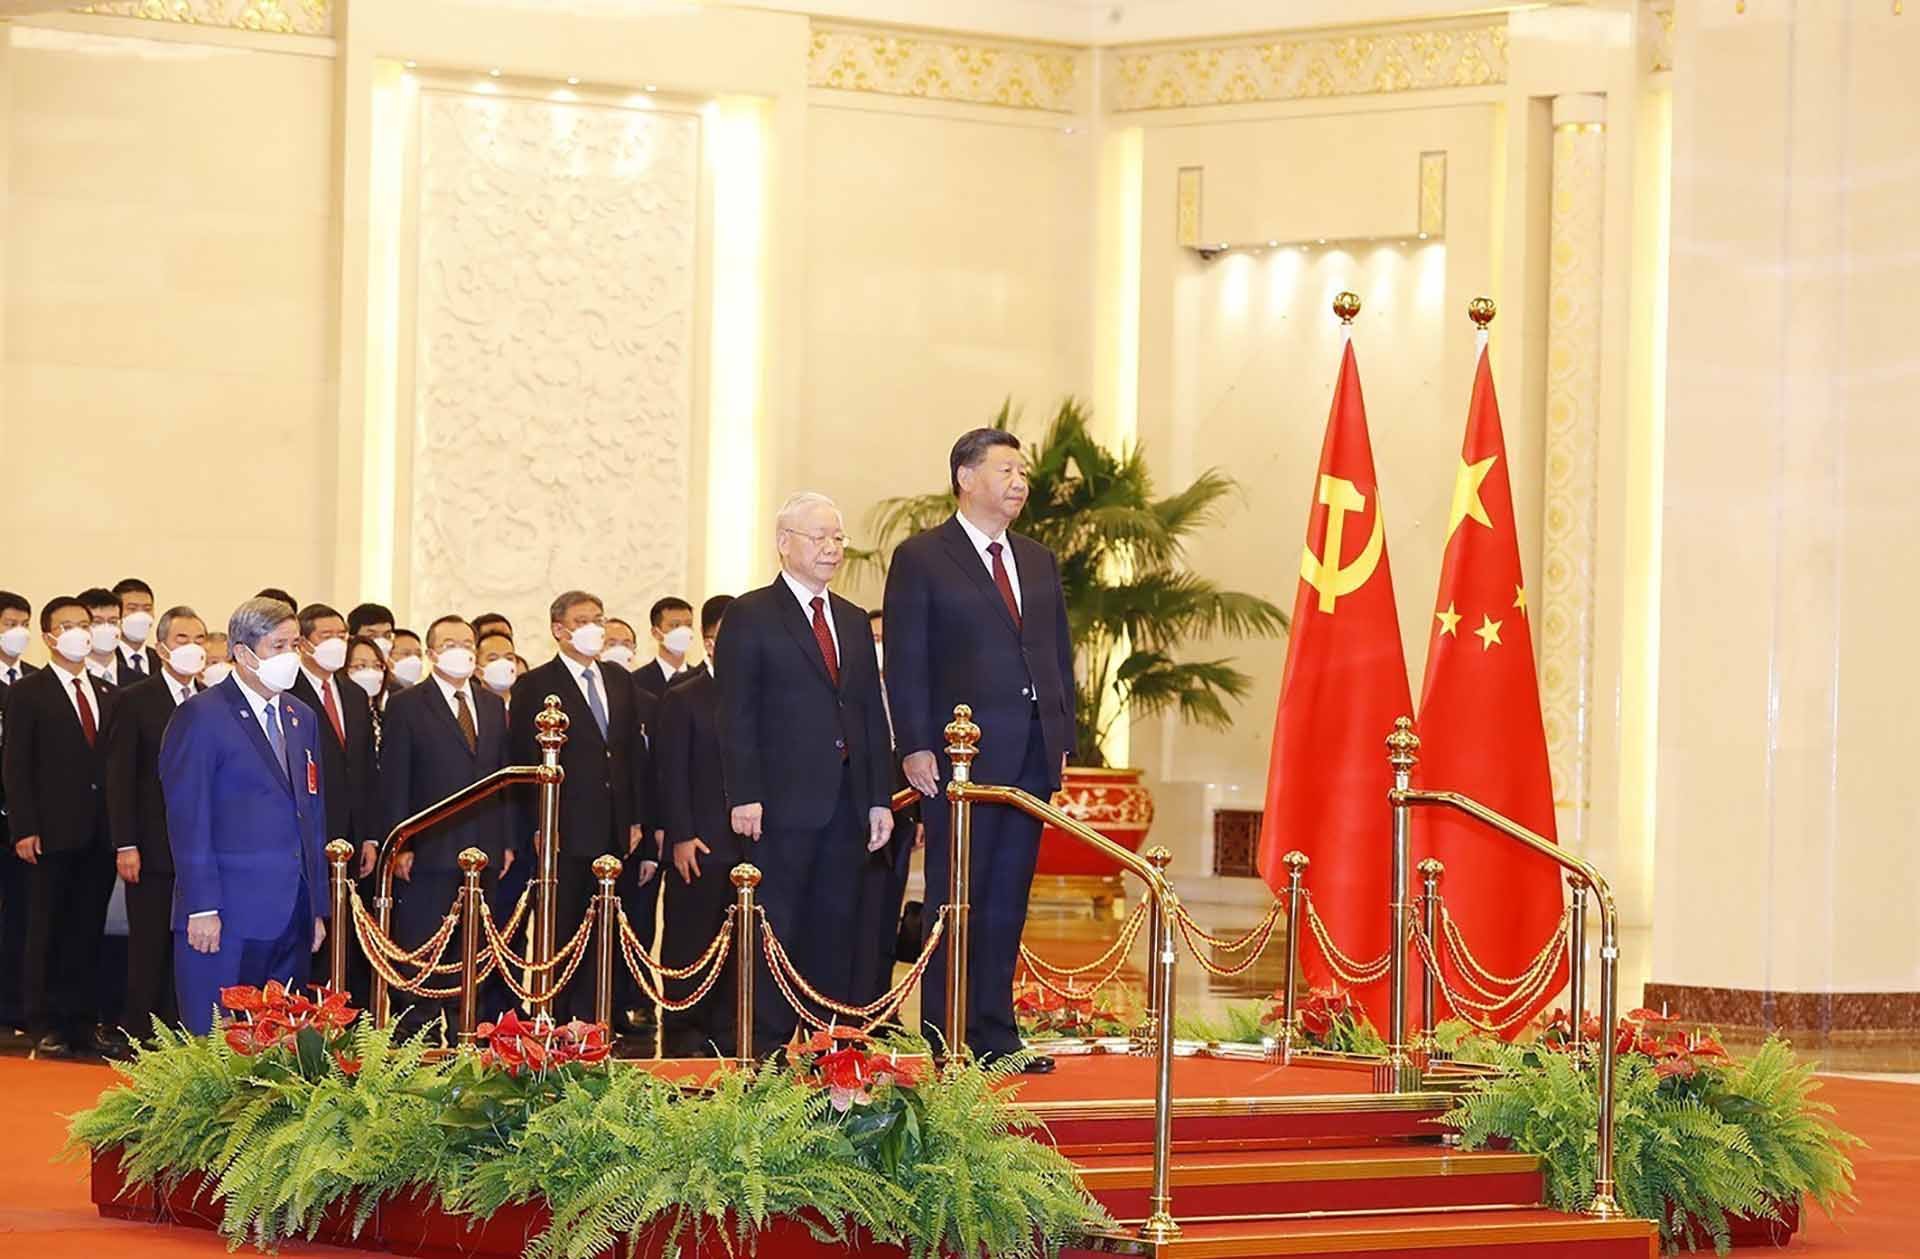 Welcome ceremony at highest level held for Vietnamese Party leader in China